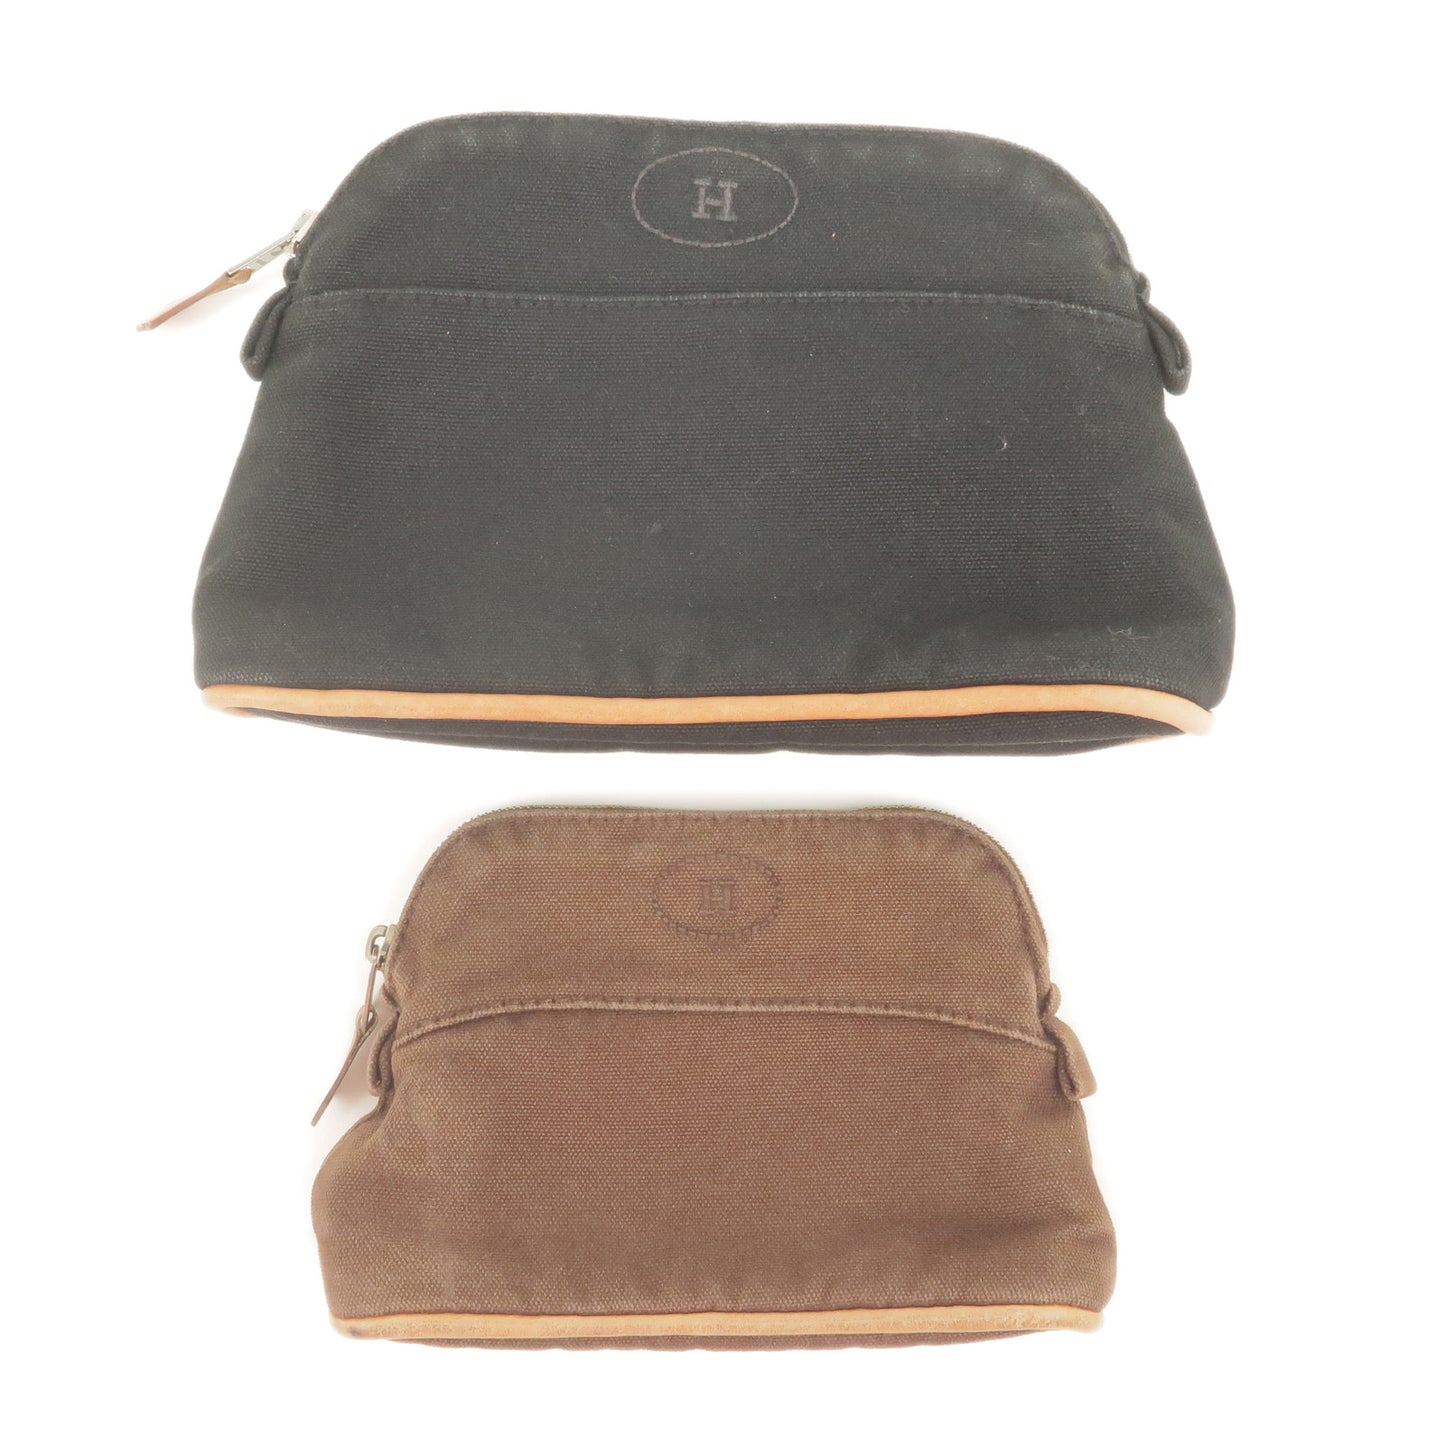 Set-of-2-HERMES-Canvas-Leather-Bolide-Pouch-Black-Brown